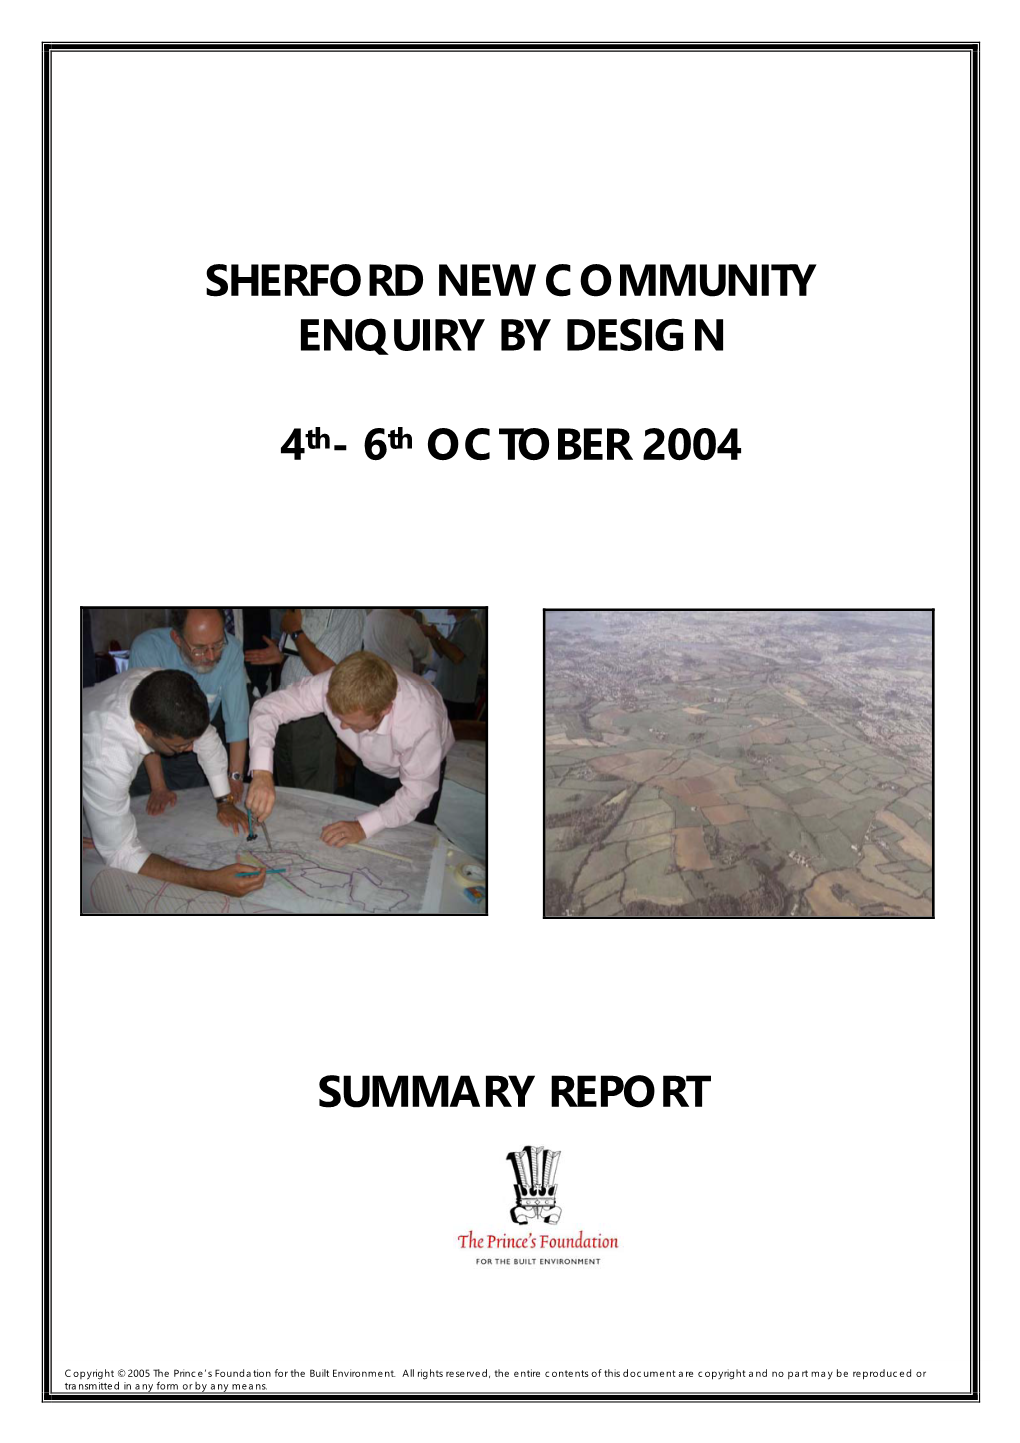 Sherford New Community Enquiry by Design